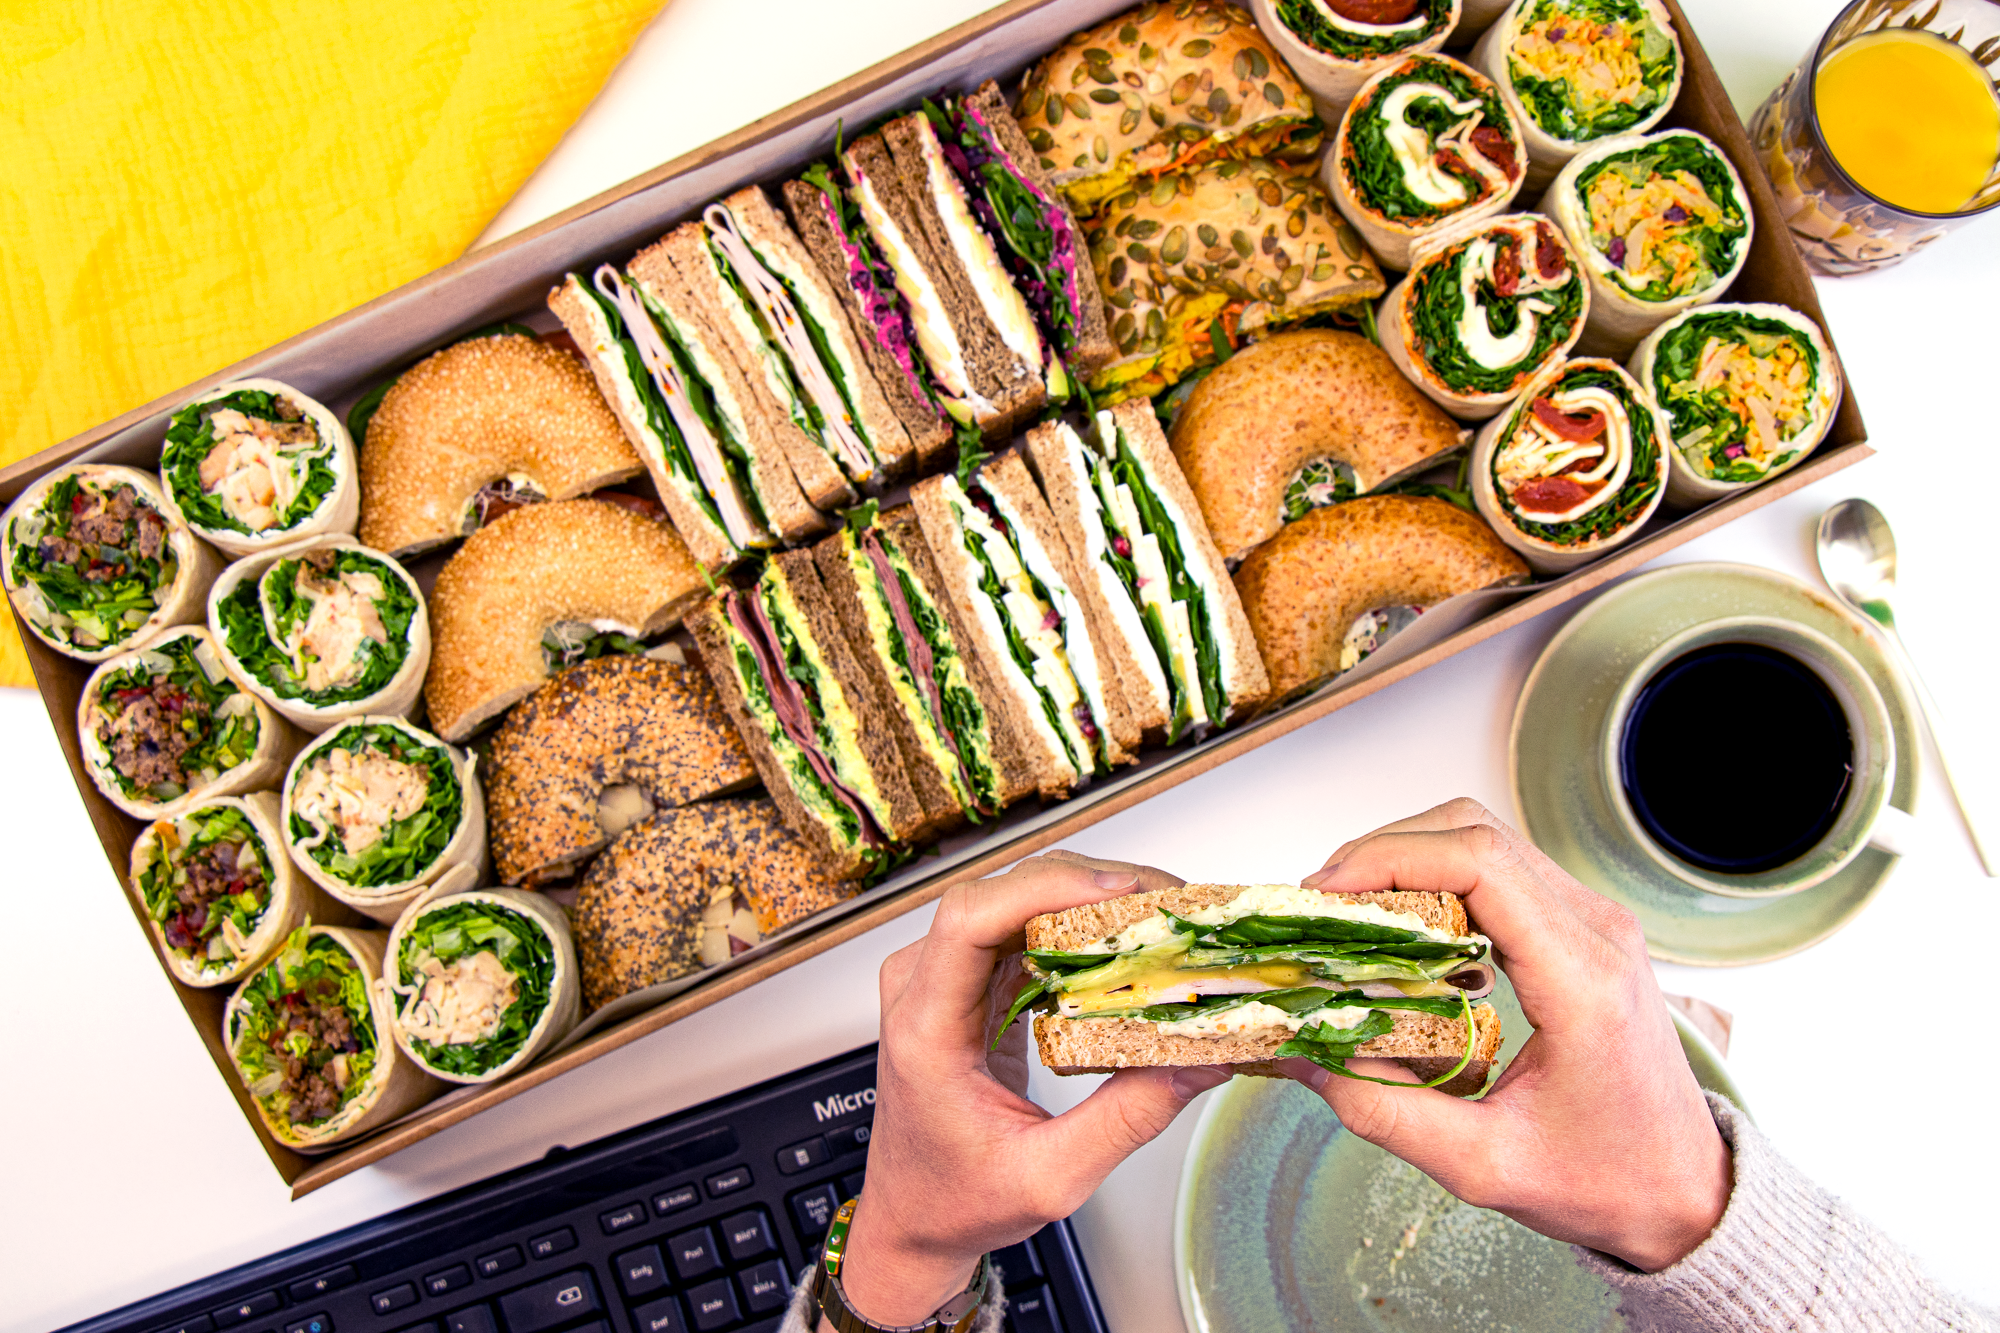 Fingerfood Catering: Die Smarte Wahl für Business Lunch Catering im Büro